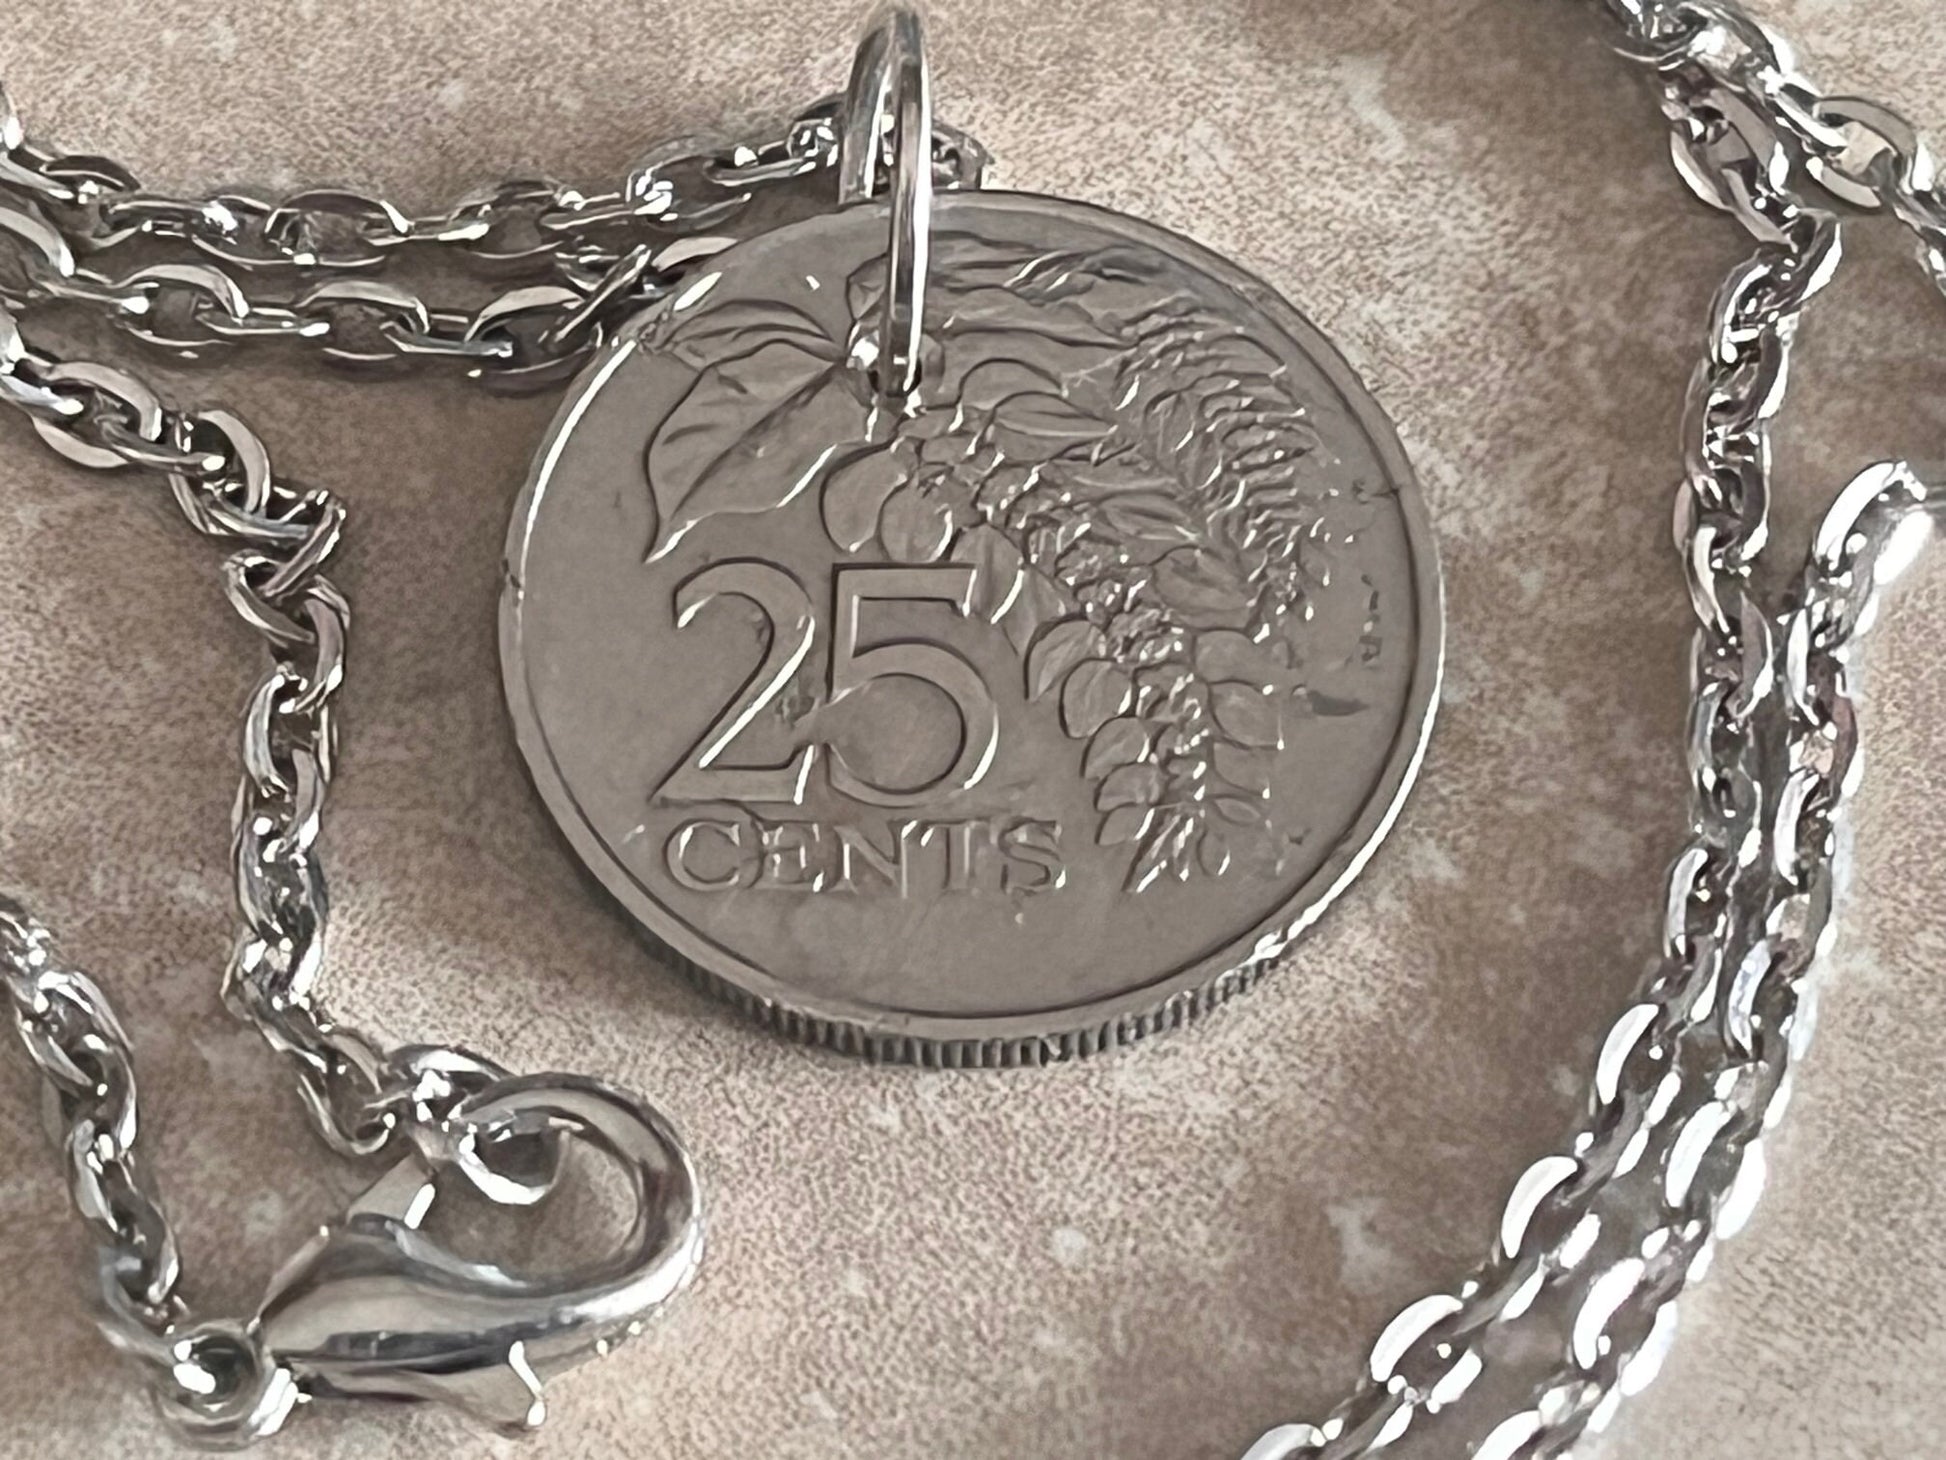 Trinidad and Tobago Coin Necklace 25 Cents Pendant Personal Vintage Handmade Jewelry Gift Friend Charm For Him Her World Coin Collector